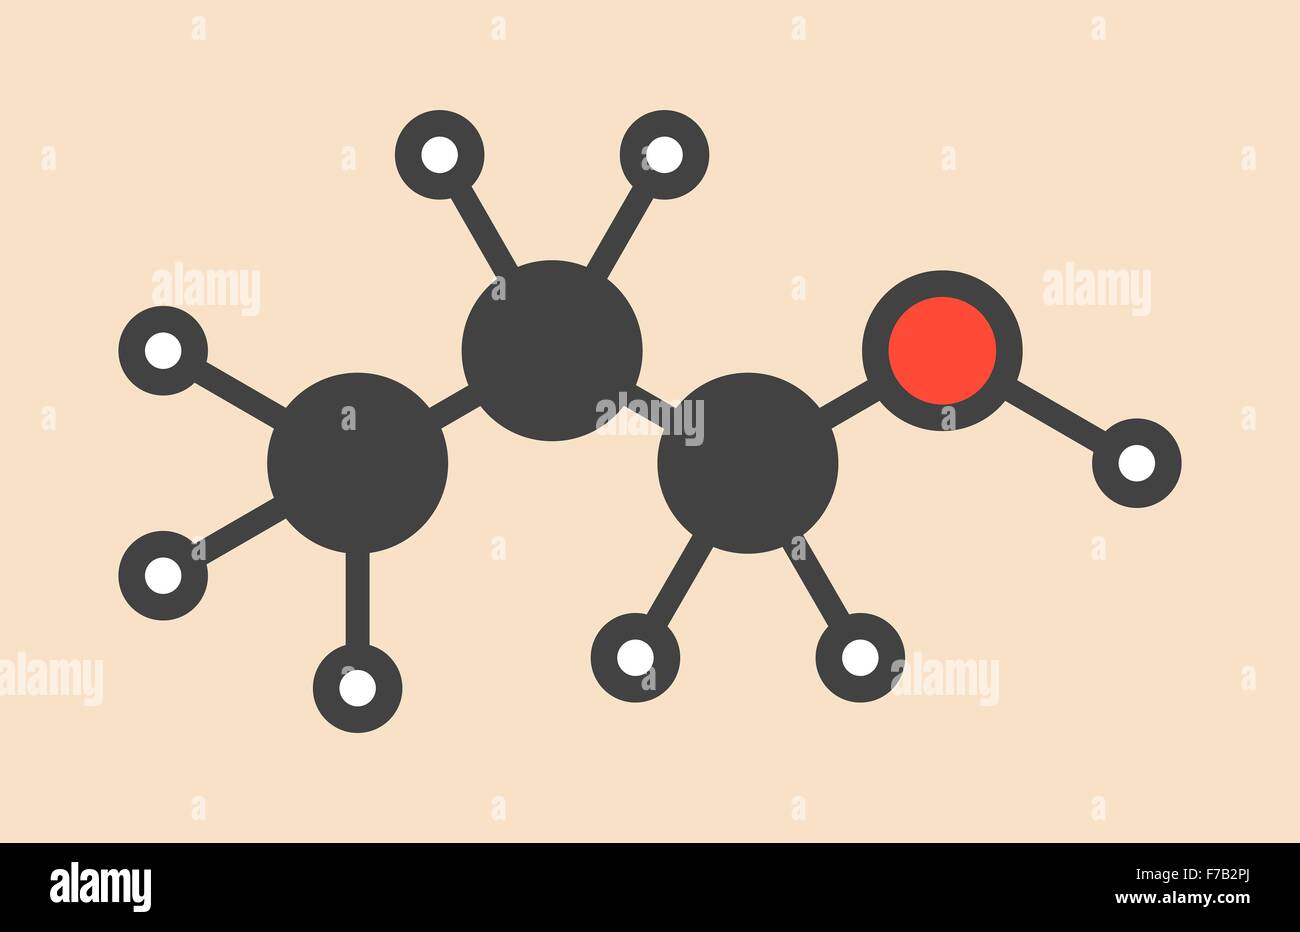 Propanol (n-propanol) solvent molecule. Stylized skeletal formula (chemical structure). Atoms are shown as color-coded circles: Stock Photo